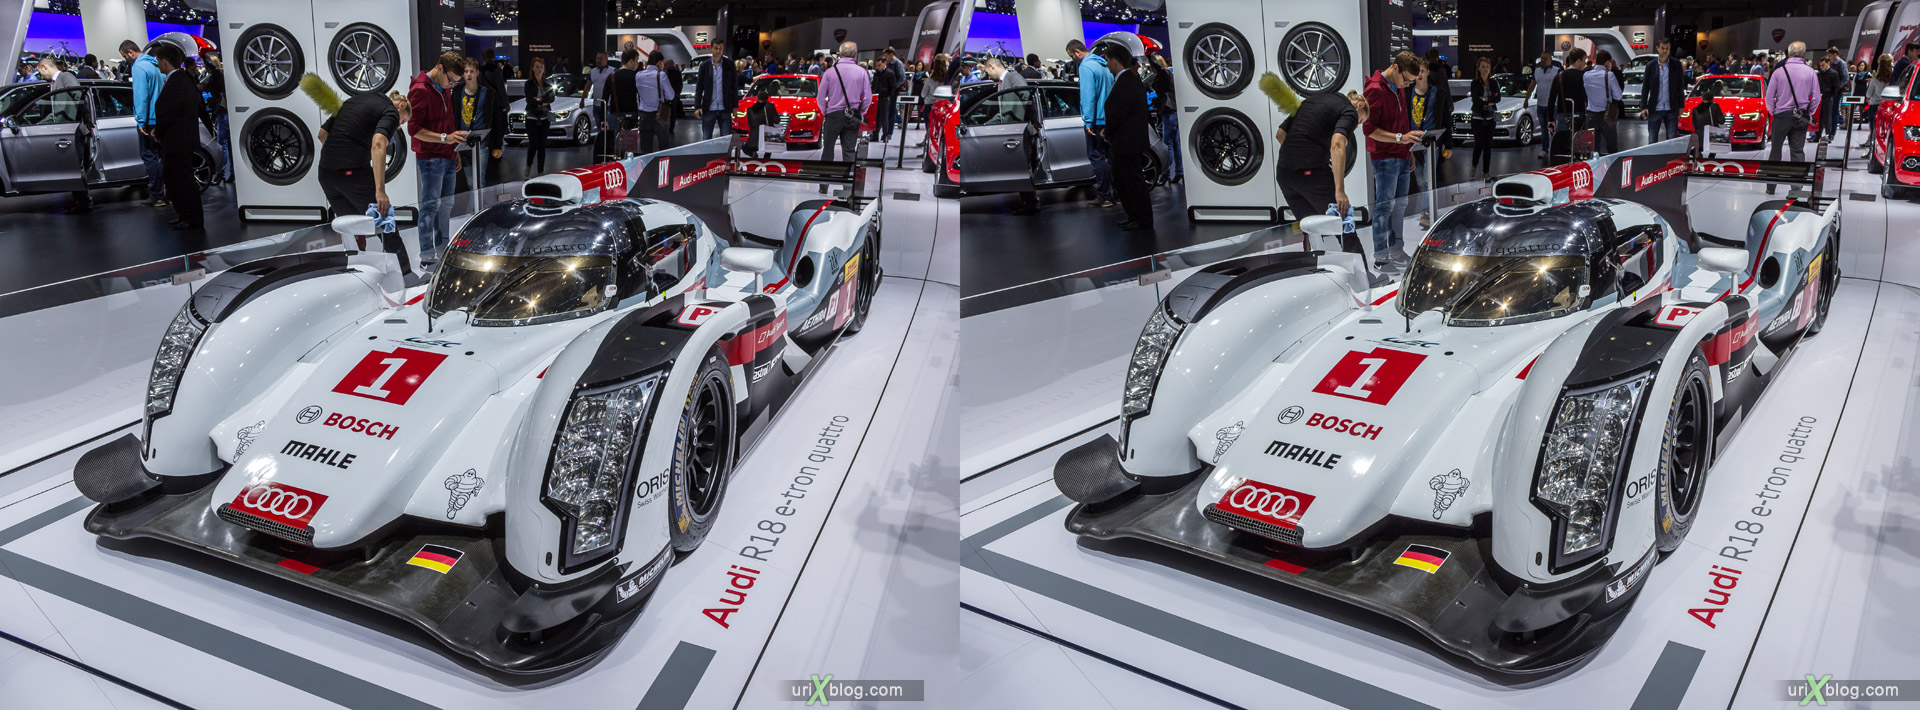 2014, Audi R18 e-tron quattro, Moscow International Automobile Salon, MIAS, Crocus Expo, Moscow, Russia, augest, 3D, stereo pair, cross-eyed, crossview, cross view stereo pair, stereoscopic